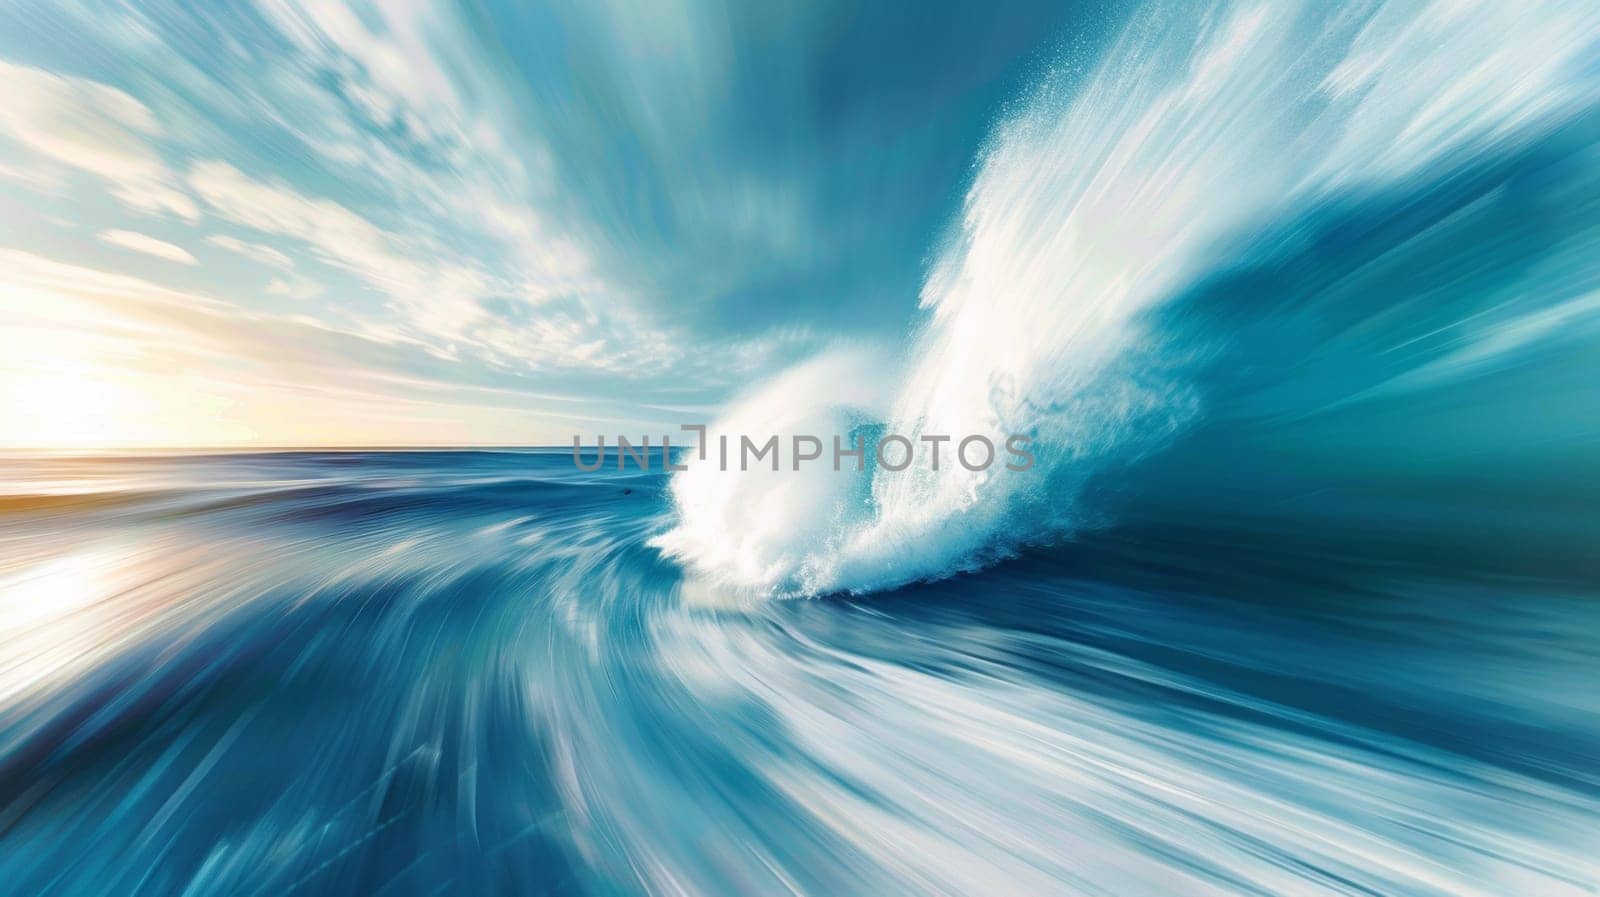 A large wave crashing into the ocean in a blurry photo, AI by starush